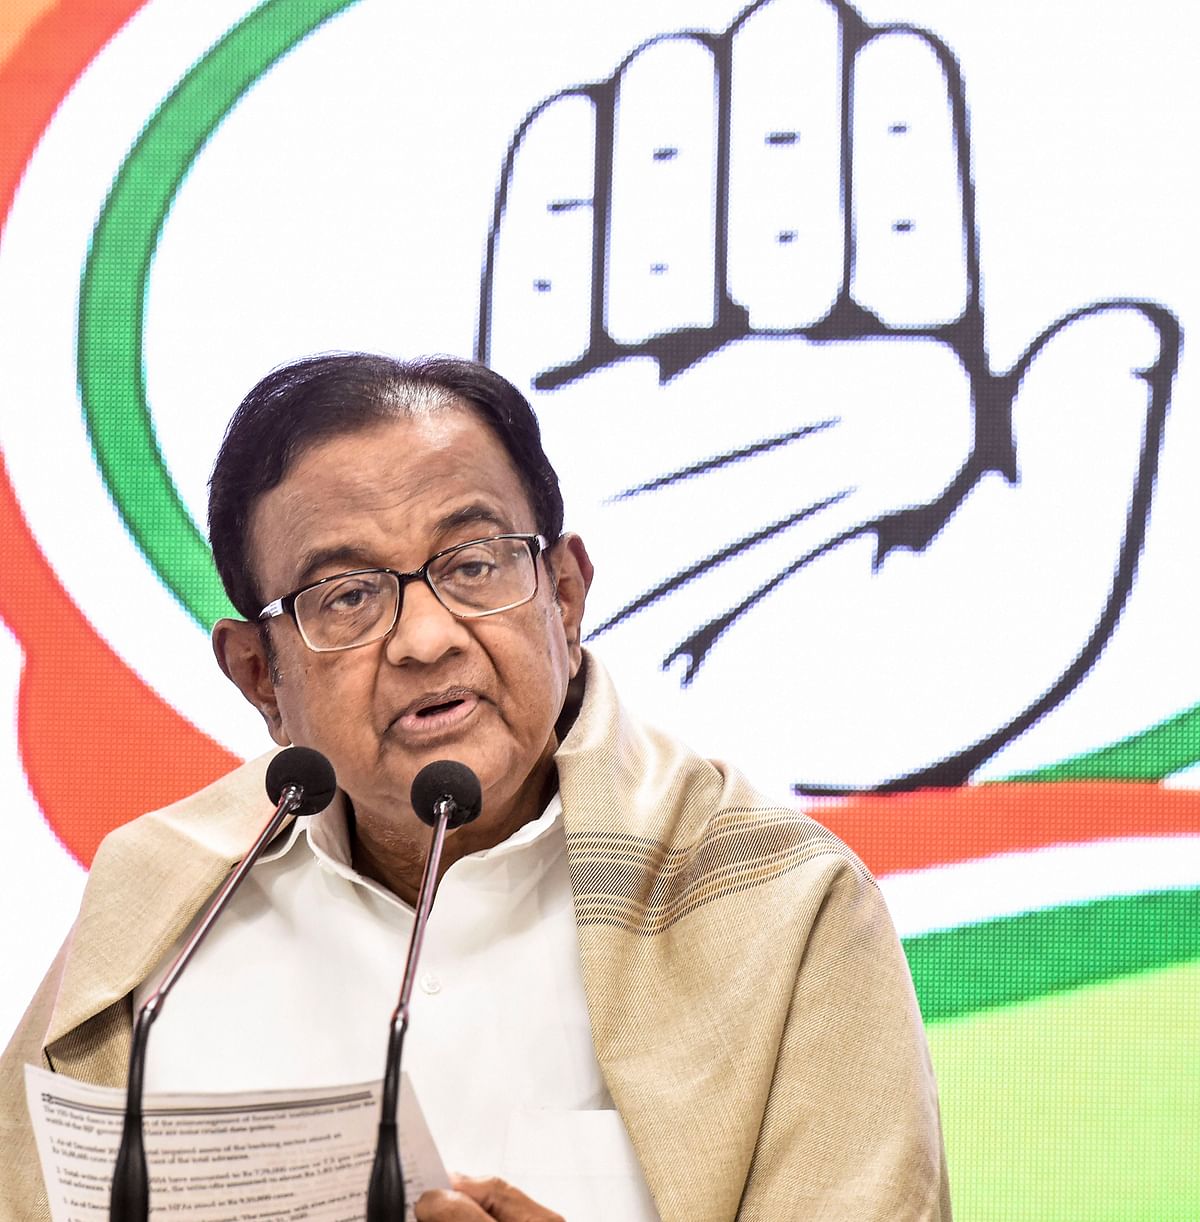 Hope President instructs Rajasthan governor to convene Assembly session: Chidambaram